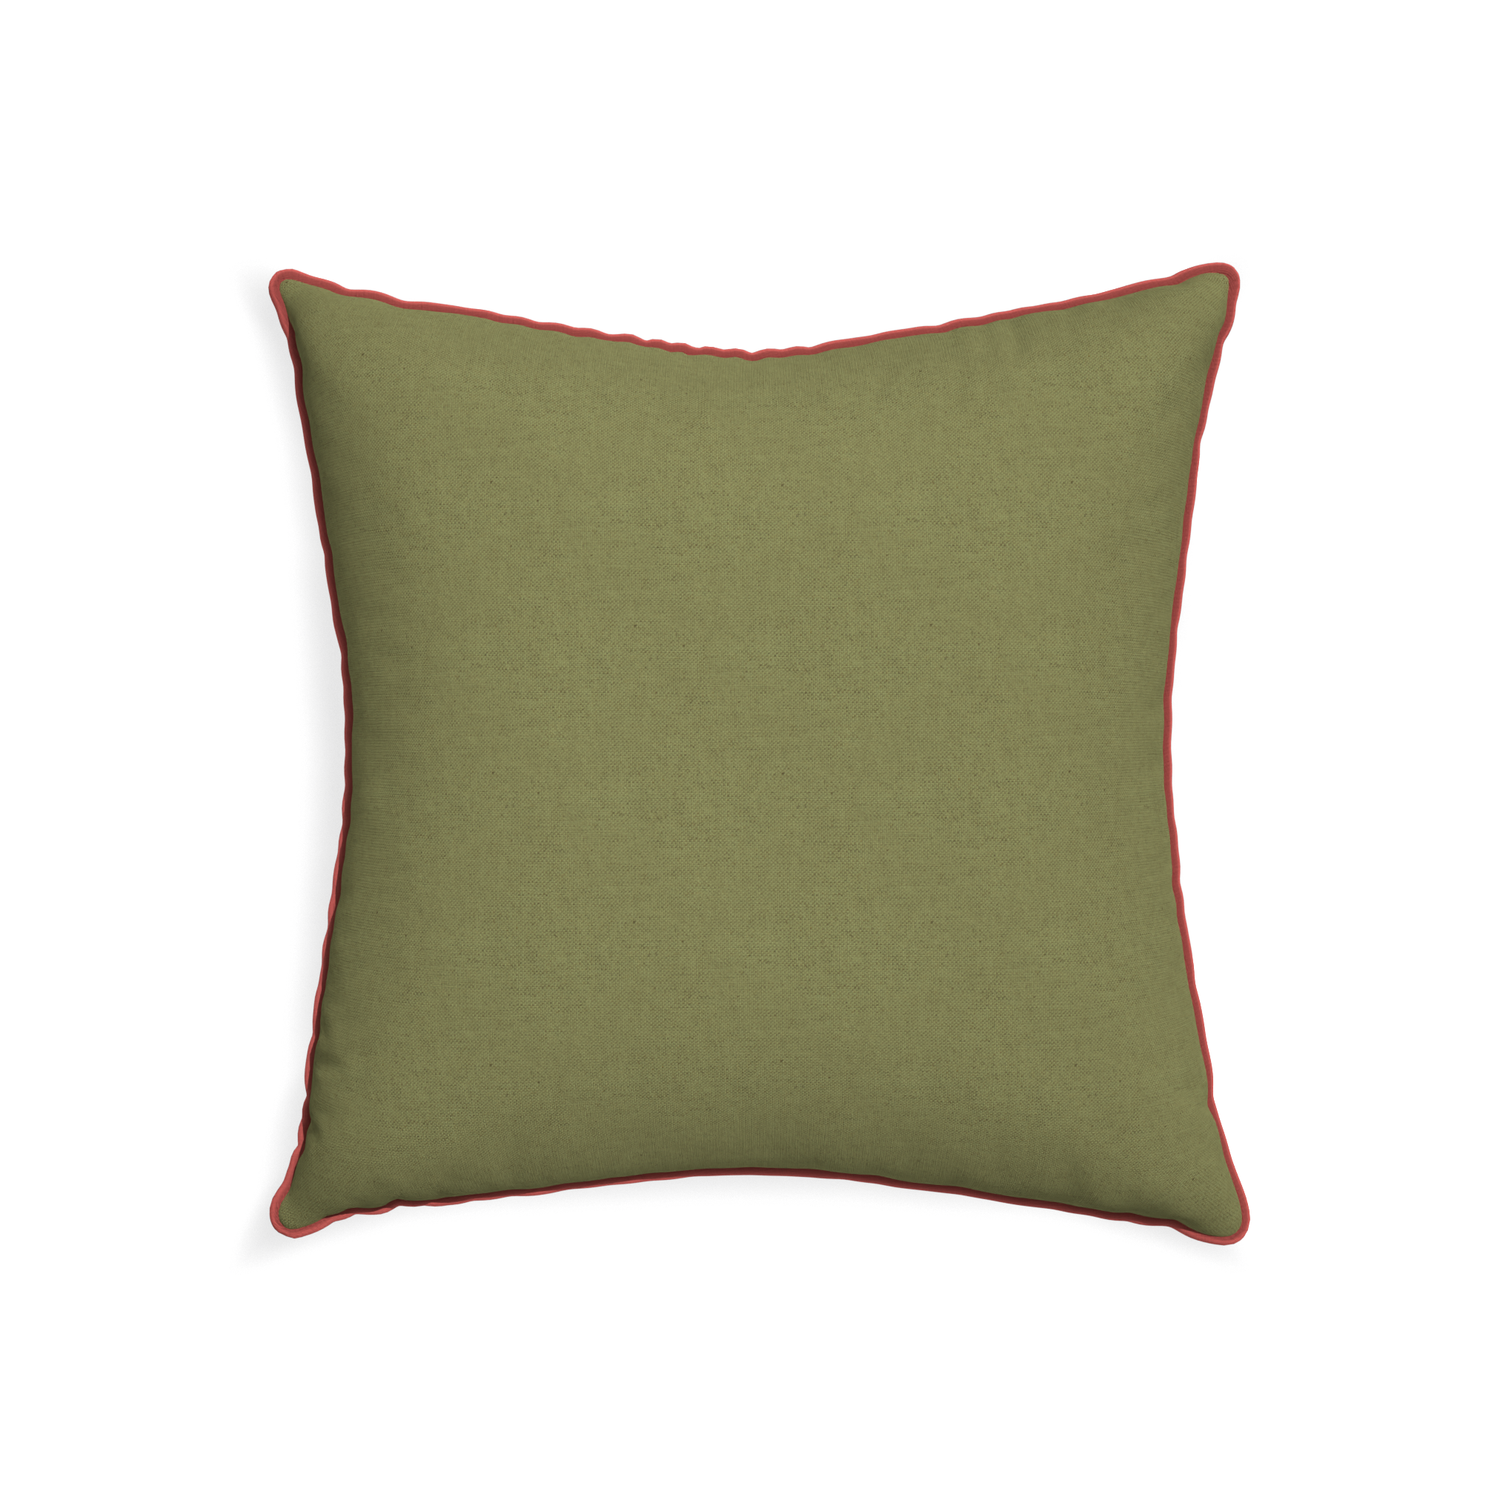 22-square moss custom moss greenpillow with c piping on white background